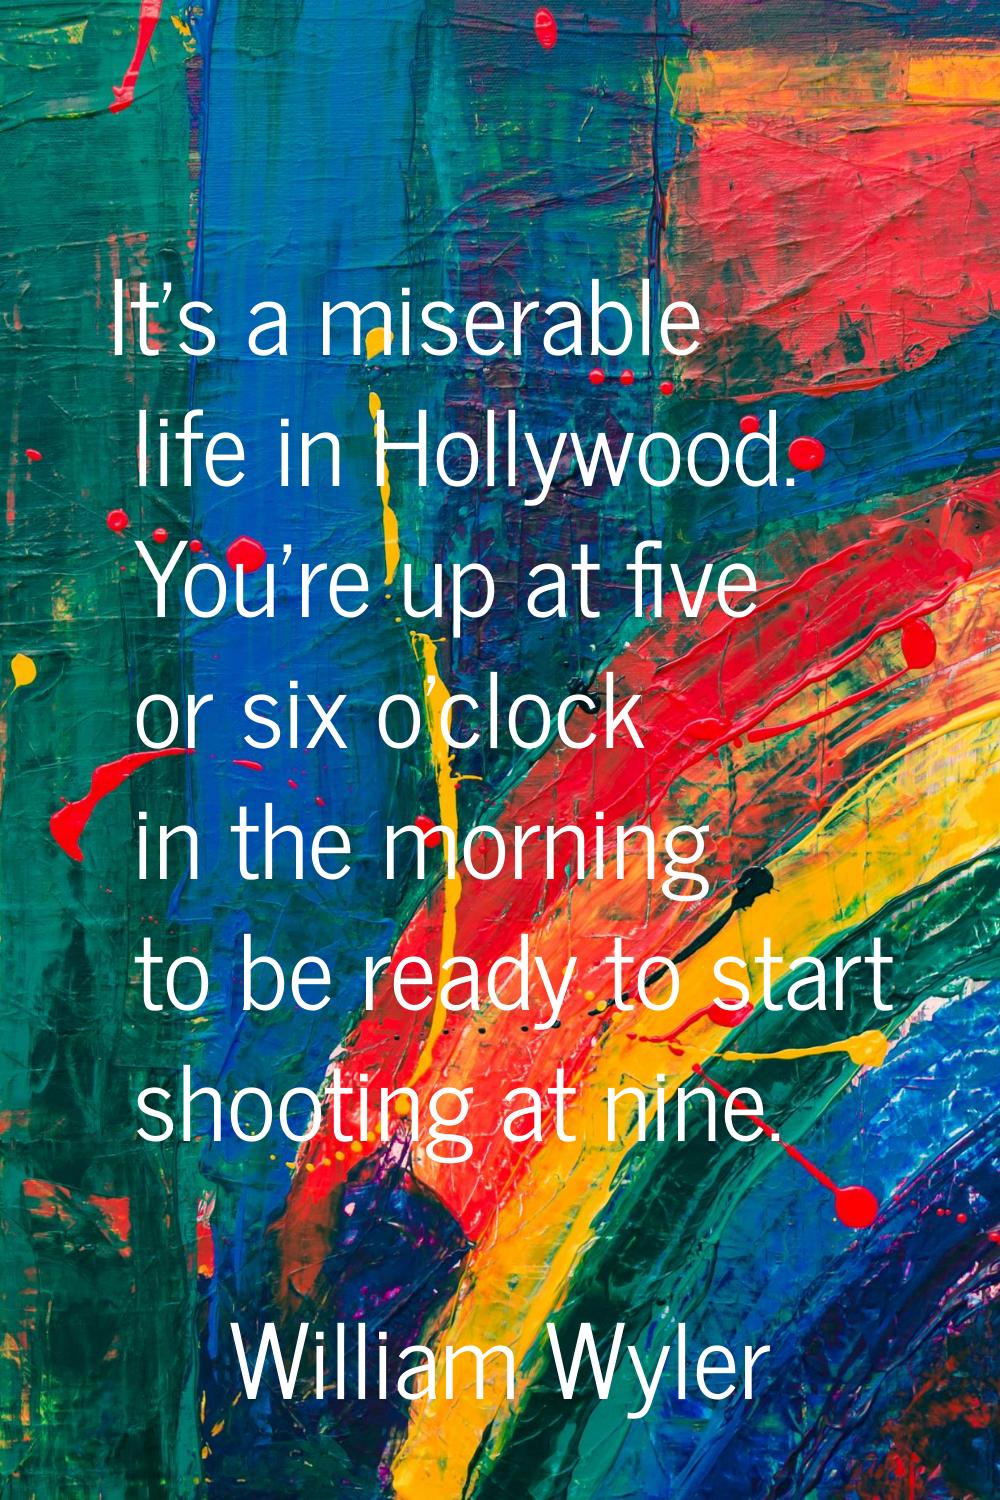 It's a miserable life in Hollywood. You're up at five or six o'clock in the morning to be ready to 